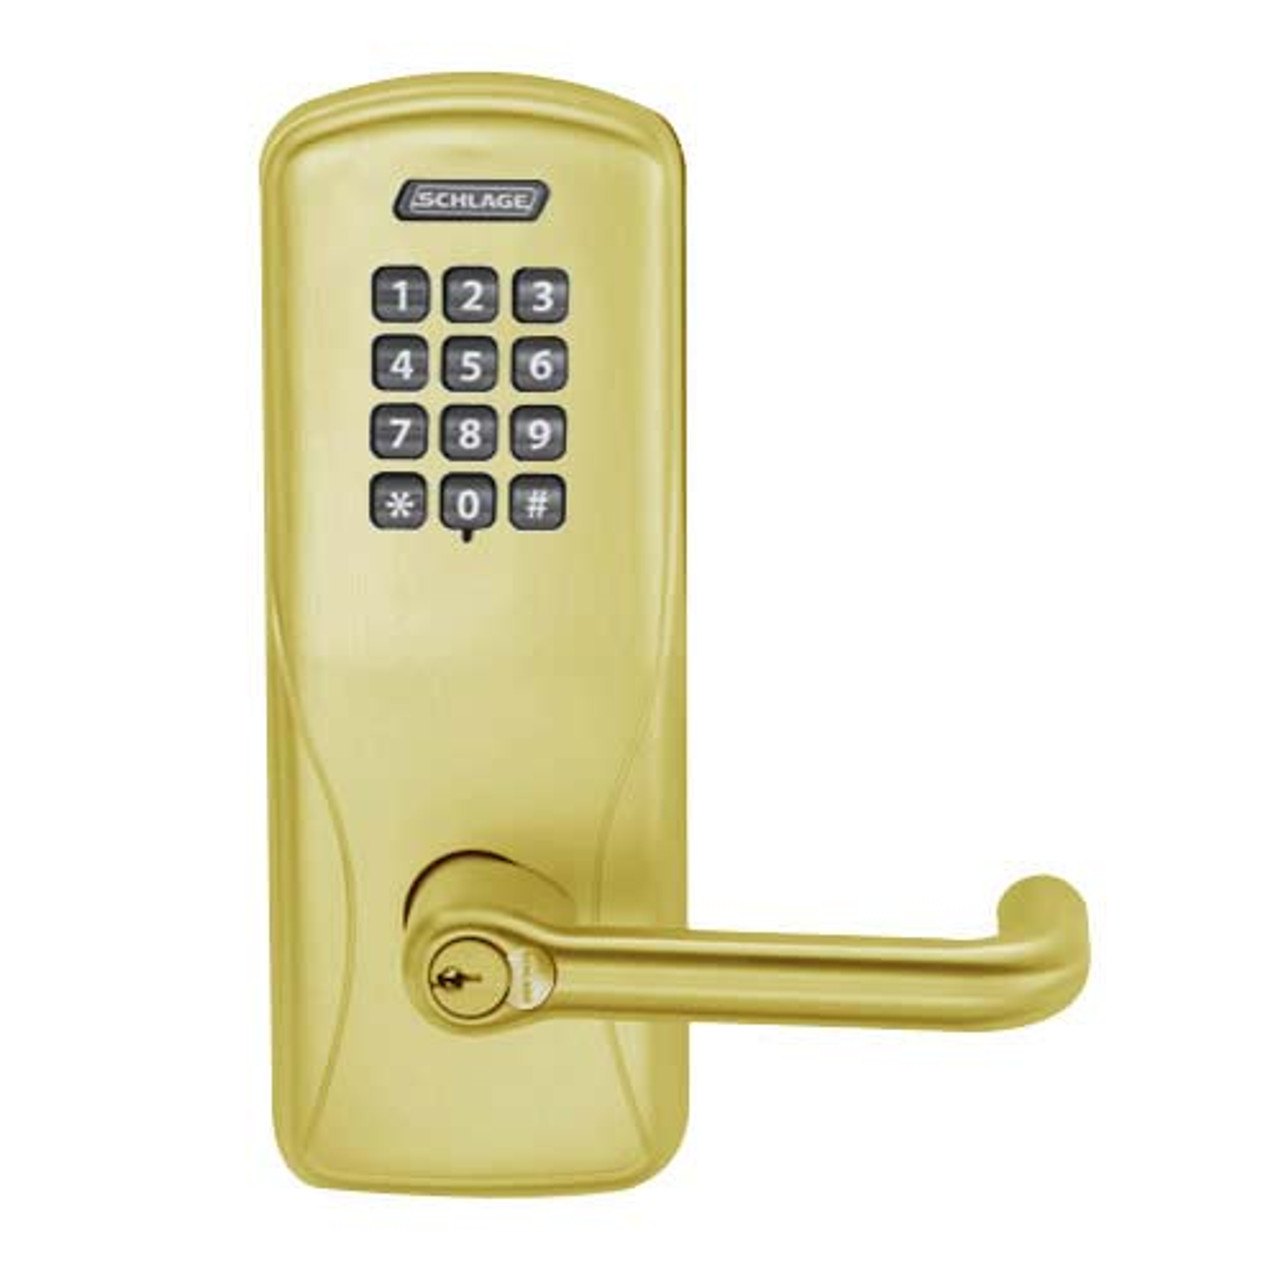 CO200-CY-70-KP-TLR-RD-606 Schlage Standalone Cylindrical Electronic Keypad locks in Satin Brass